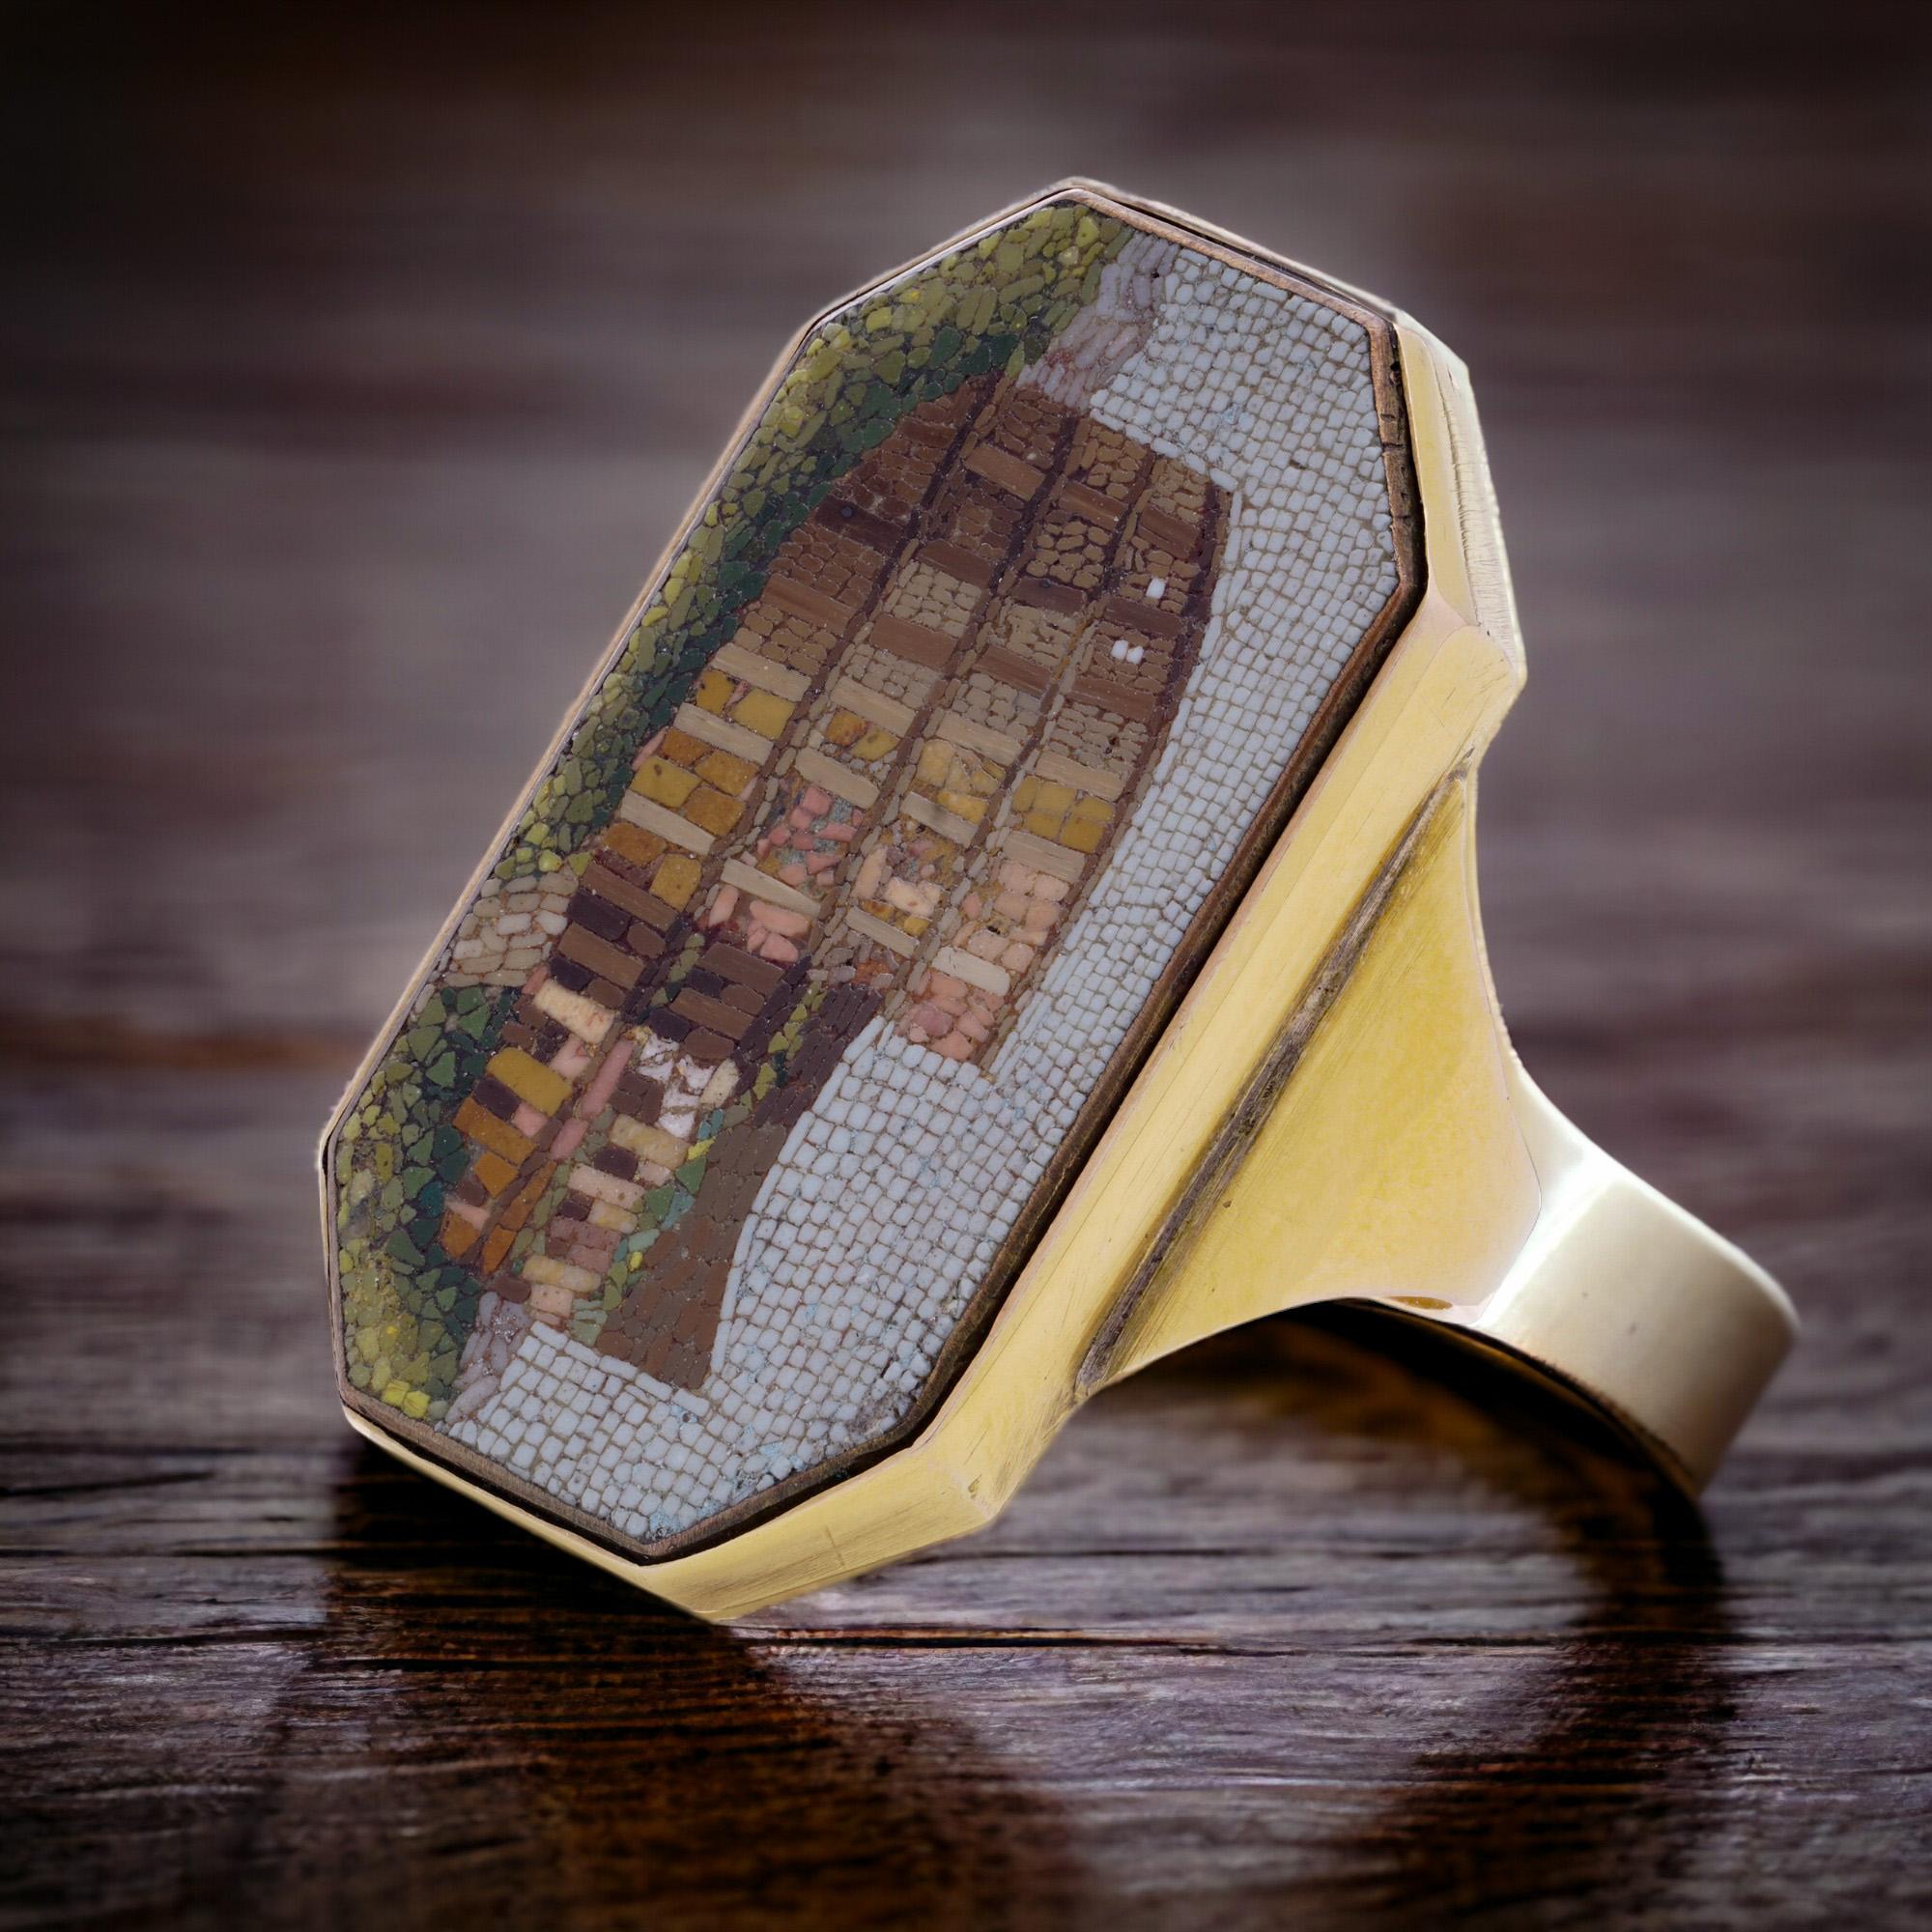 Antique 19th century 15kt. yellow gold men's micro mosaic ring featuring the Colosseum in Rome.
Made in Italy, Circa 1870's
X-Ray has been tested positive for 15kt. yellow gold.

The dimensions -
Ring Size: Length x Width x depth: 3.5 x 3 x 1.2